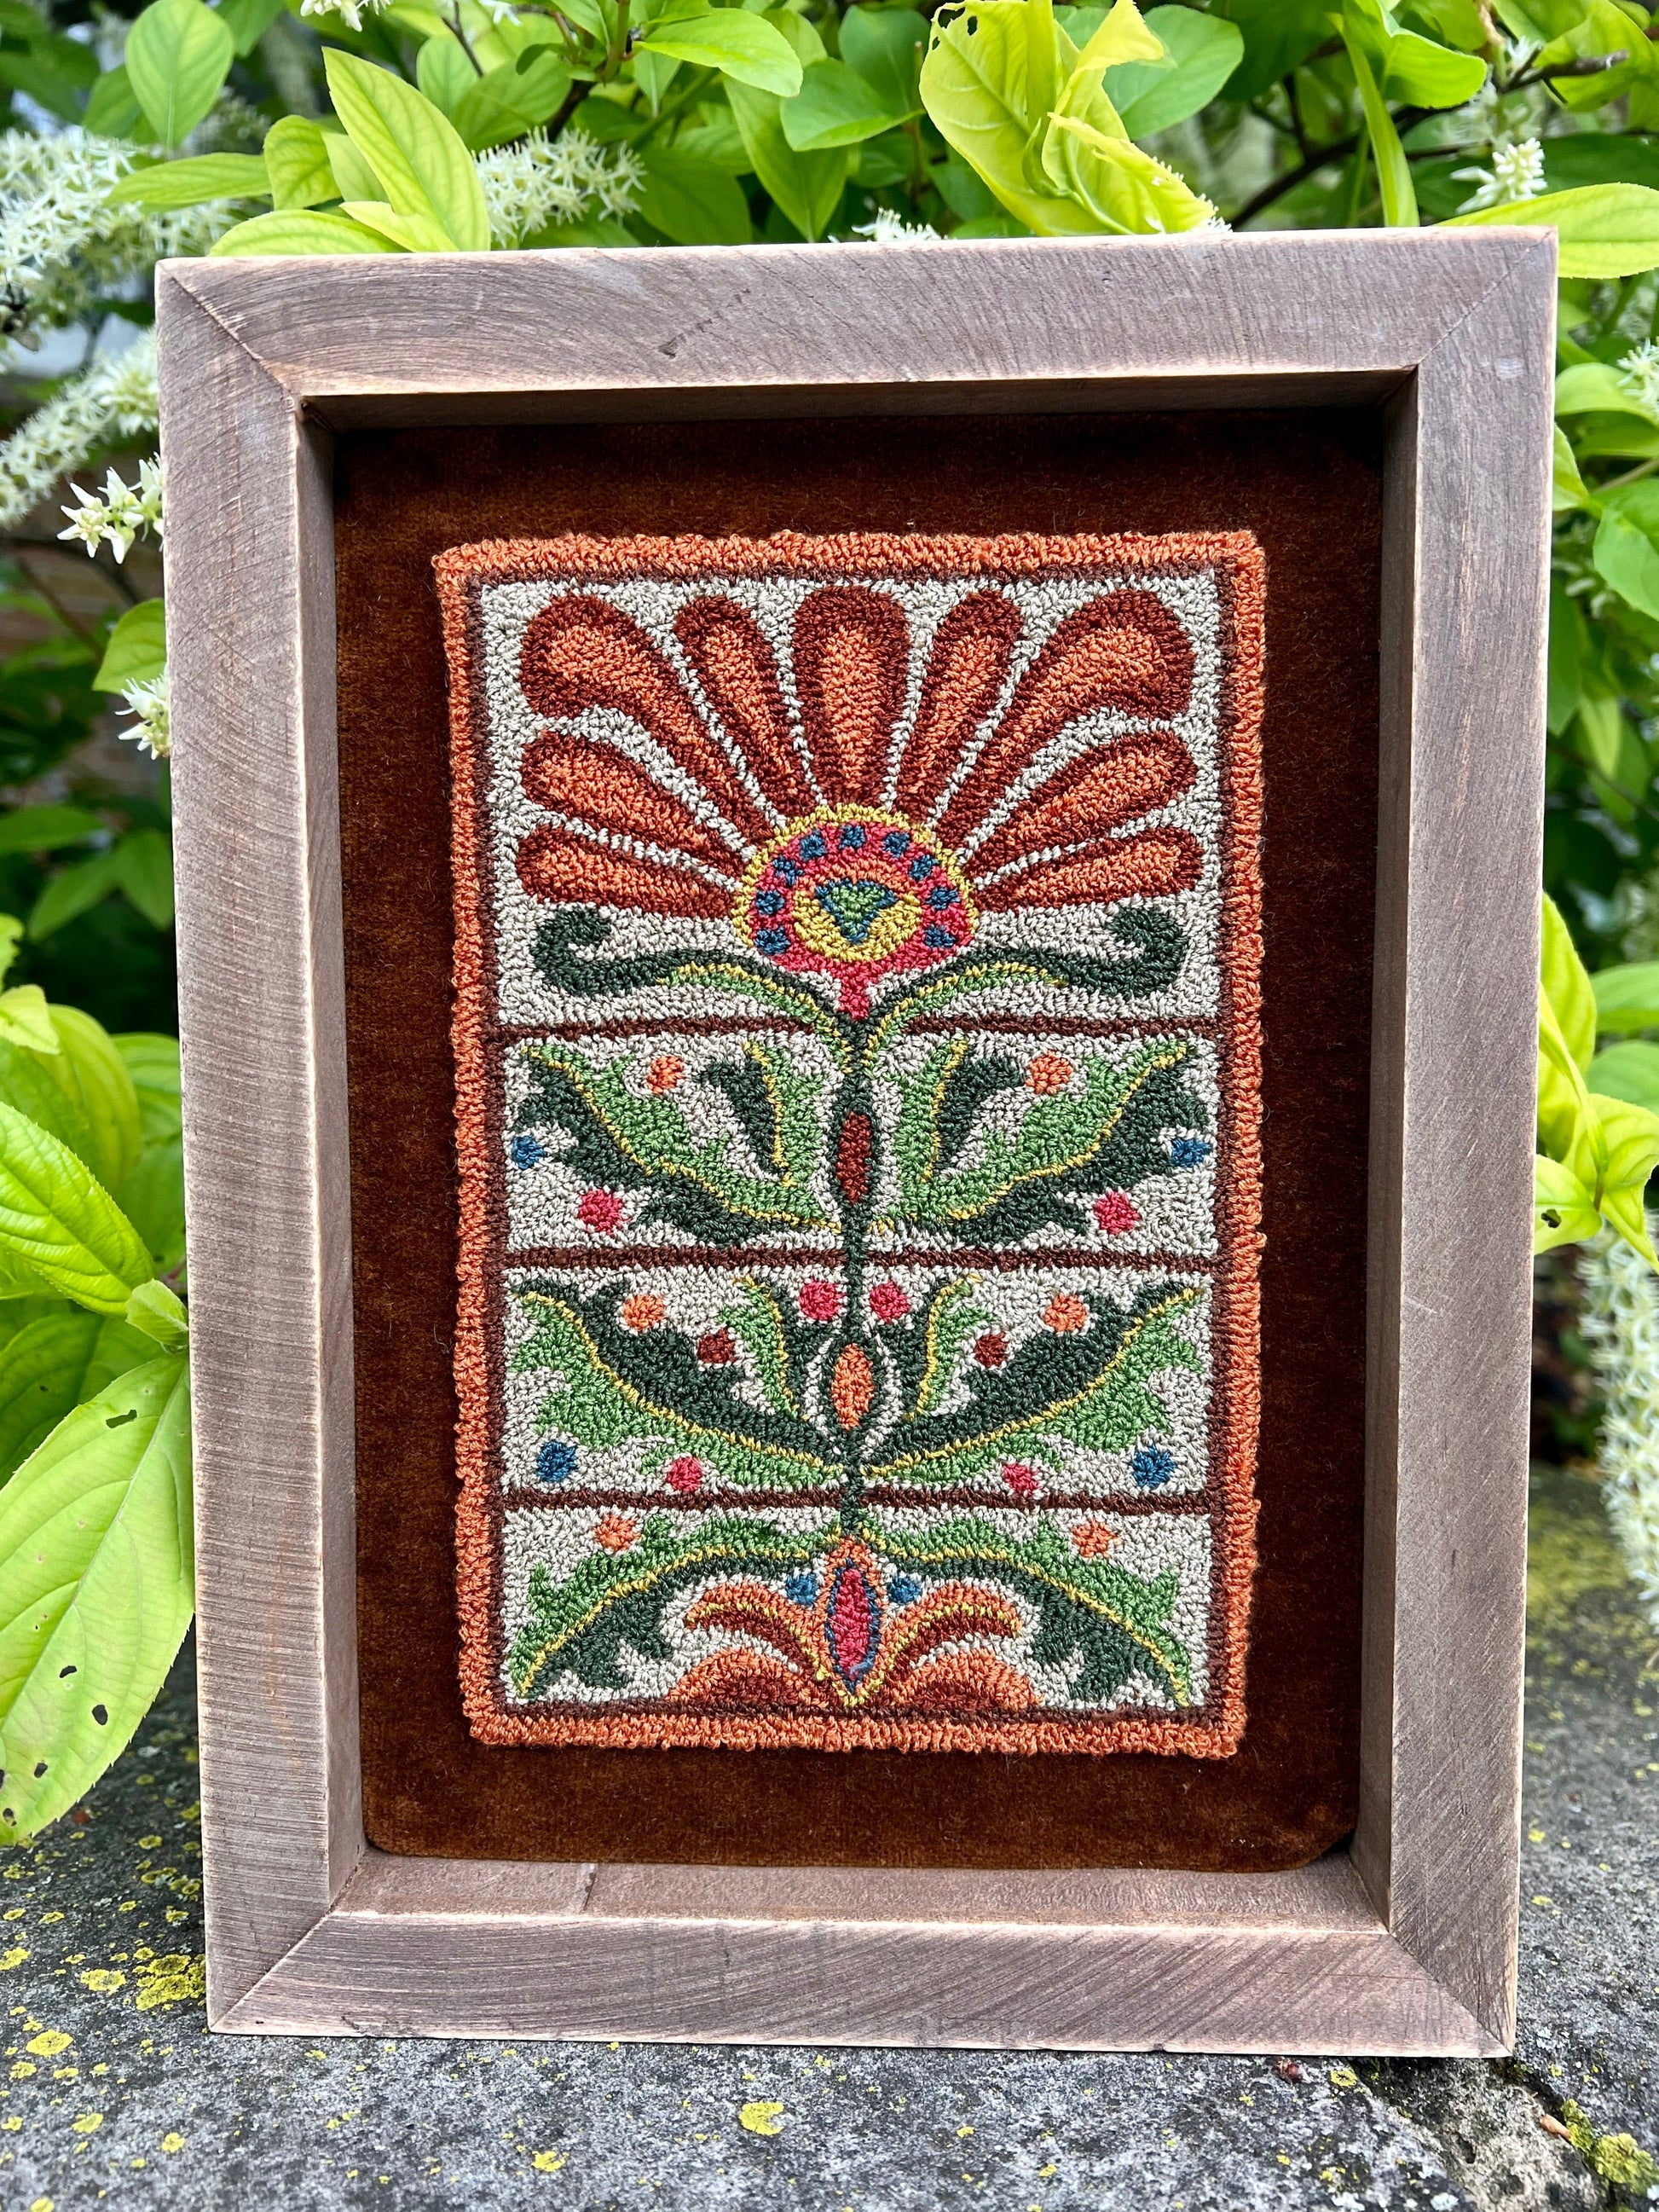 Autumn's Gift is a Punch Needle Embroidery Pattern designed by Orphaned Wool. This is a wonderful Fall Floral design to enjoy creating with DMC floss threads. Copyright 2023 Kelly Kanyok / Orphaned Wool.